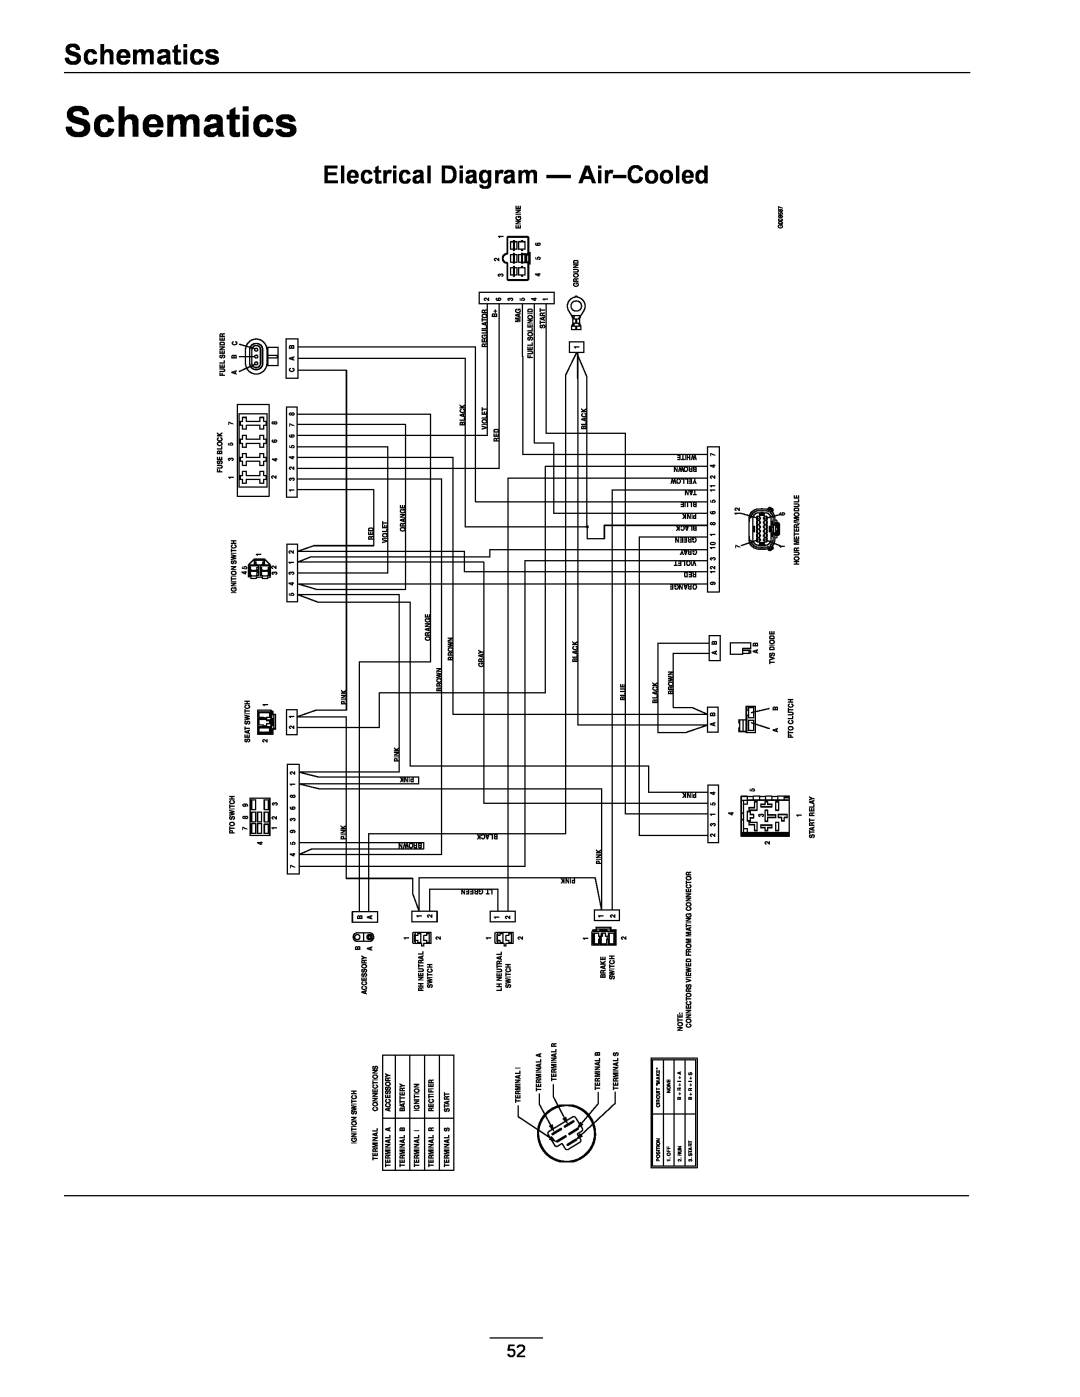 Exmark 000 & higher manual Schematics, Electrical Diagram - Air-Cooled, Black 